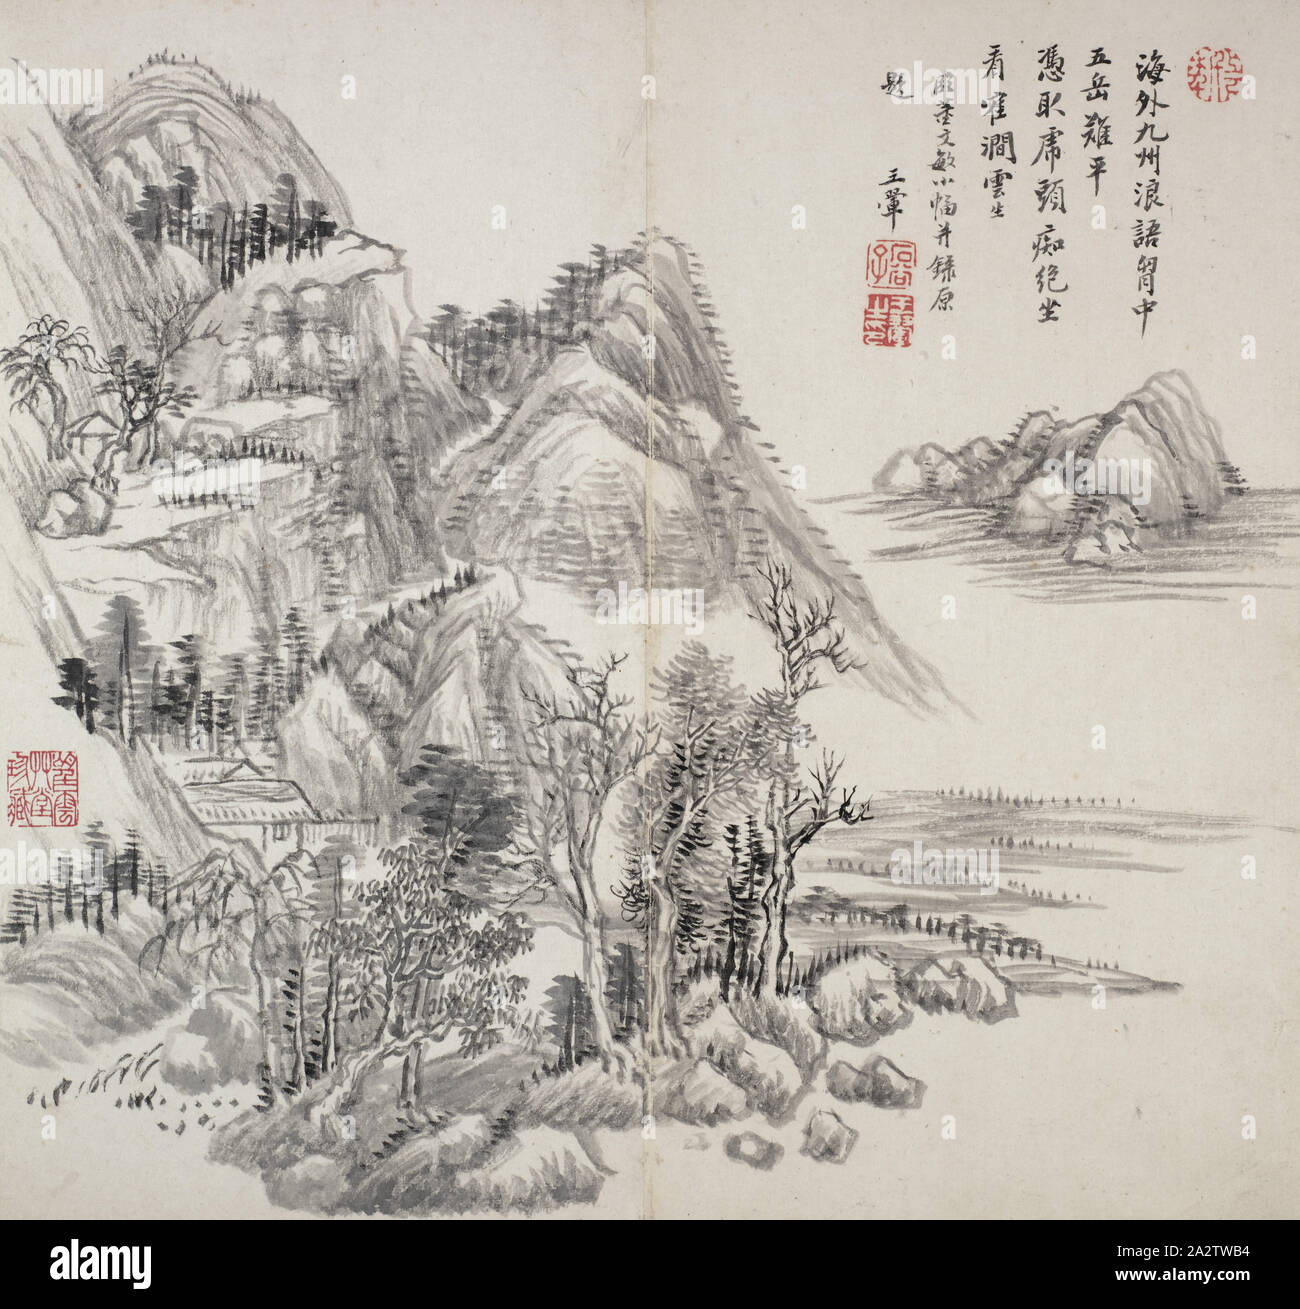 album after old masters and poems, Wang Hui (Chinese, 1632-1717), Qing dynasty, 1650-1717, album (10 leaves), ink on paper, 13 x 12-1/4 in., Asian Art Stock Photo